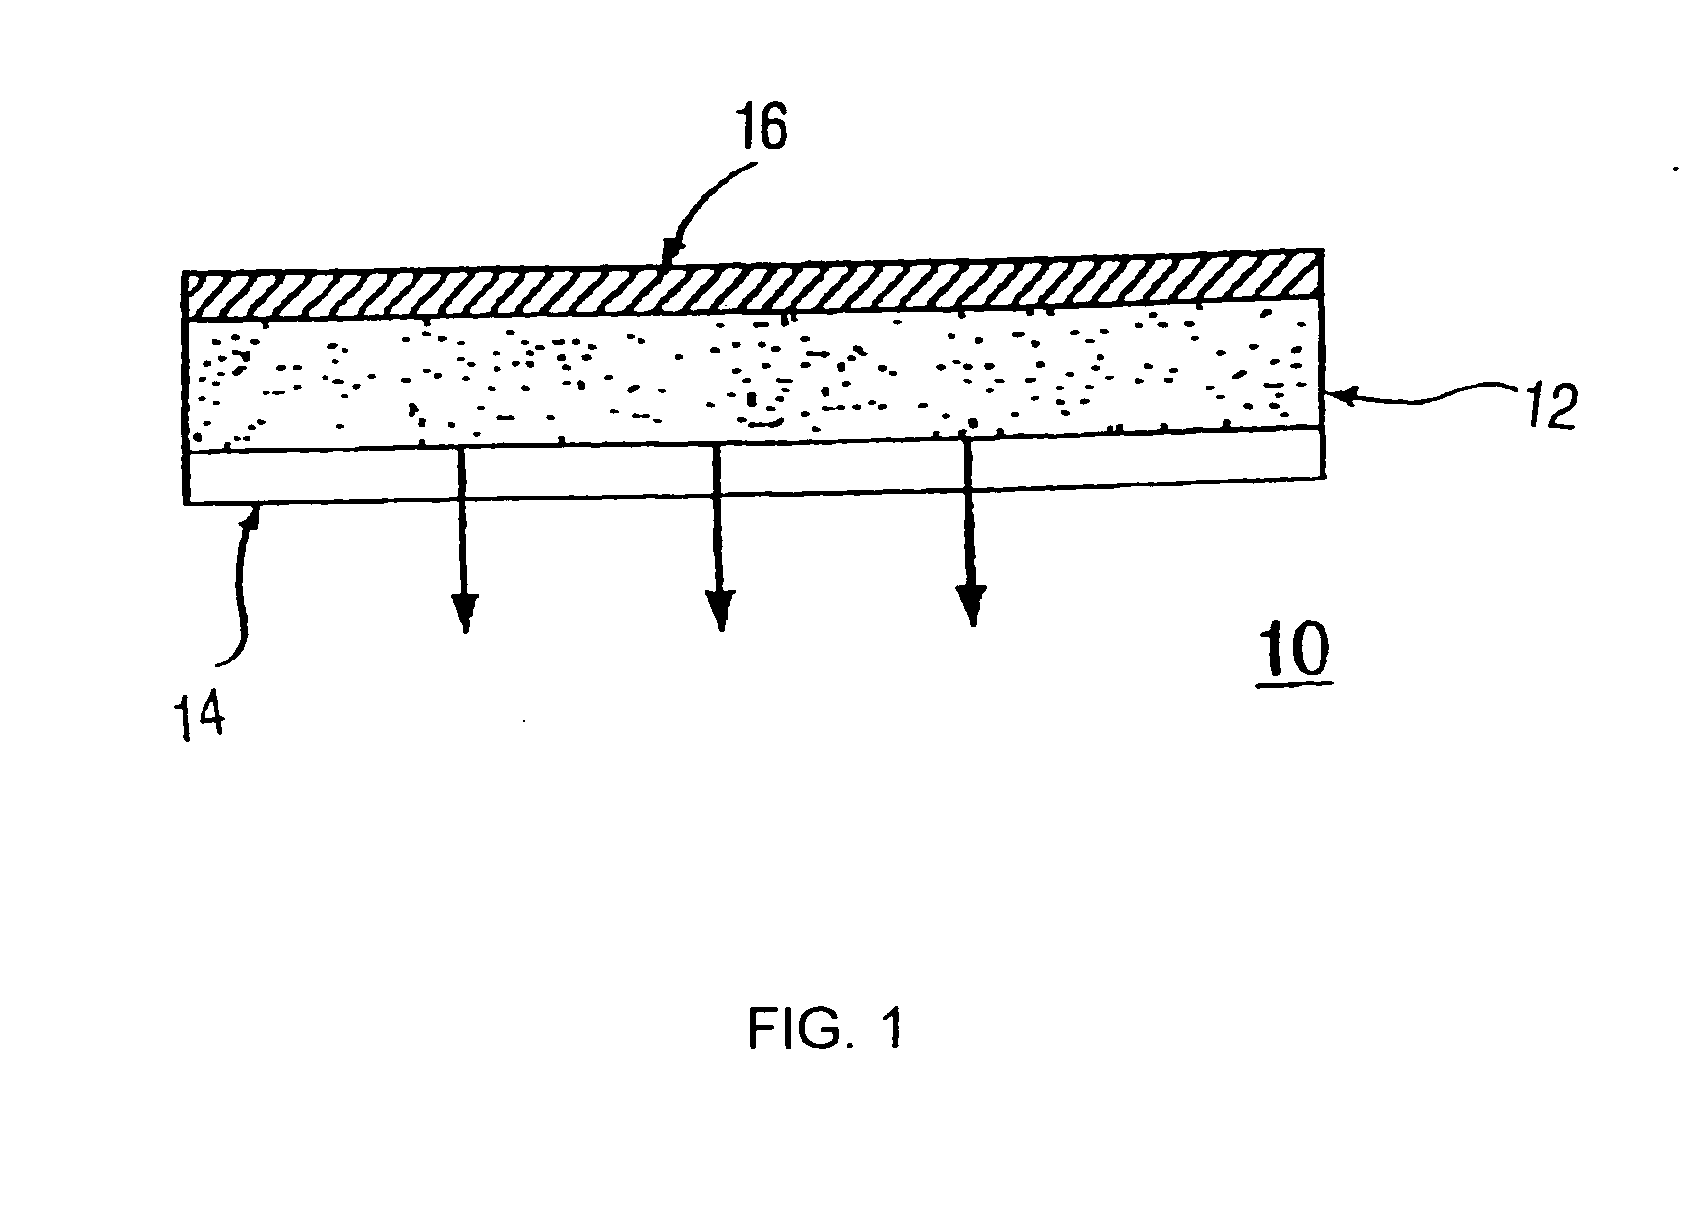 Transdermal Antiemesis Delivery System, Method and Composition Therefor